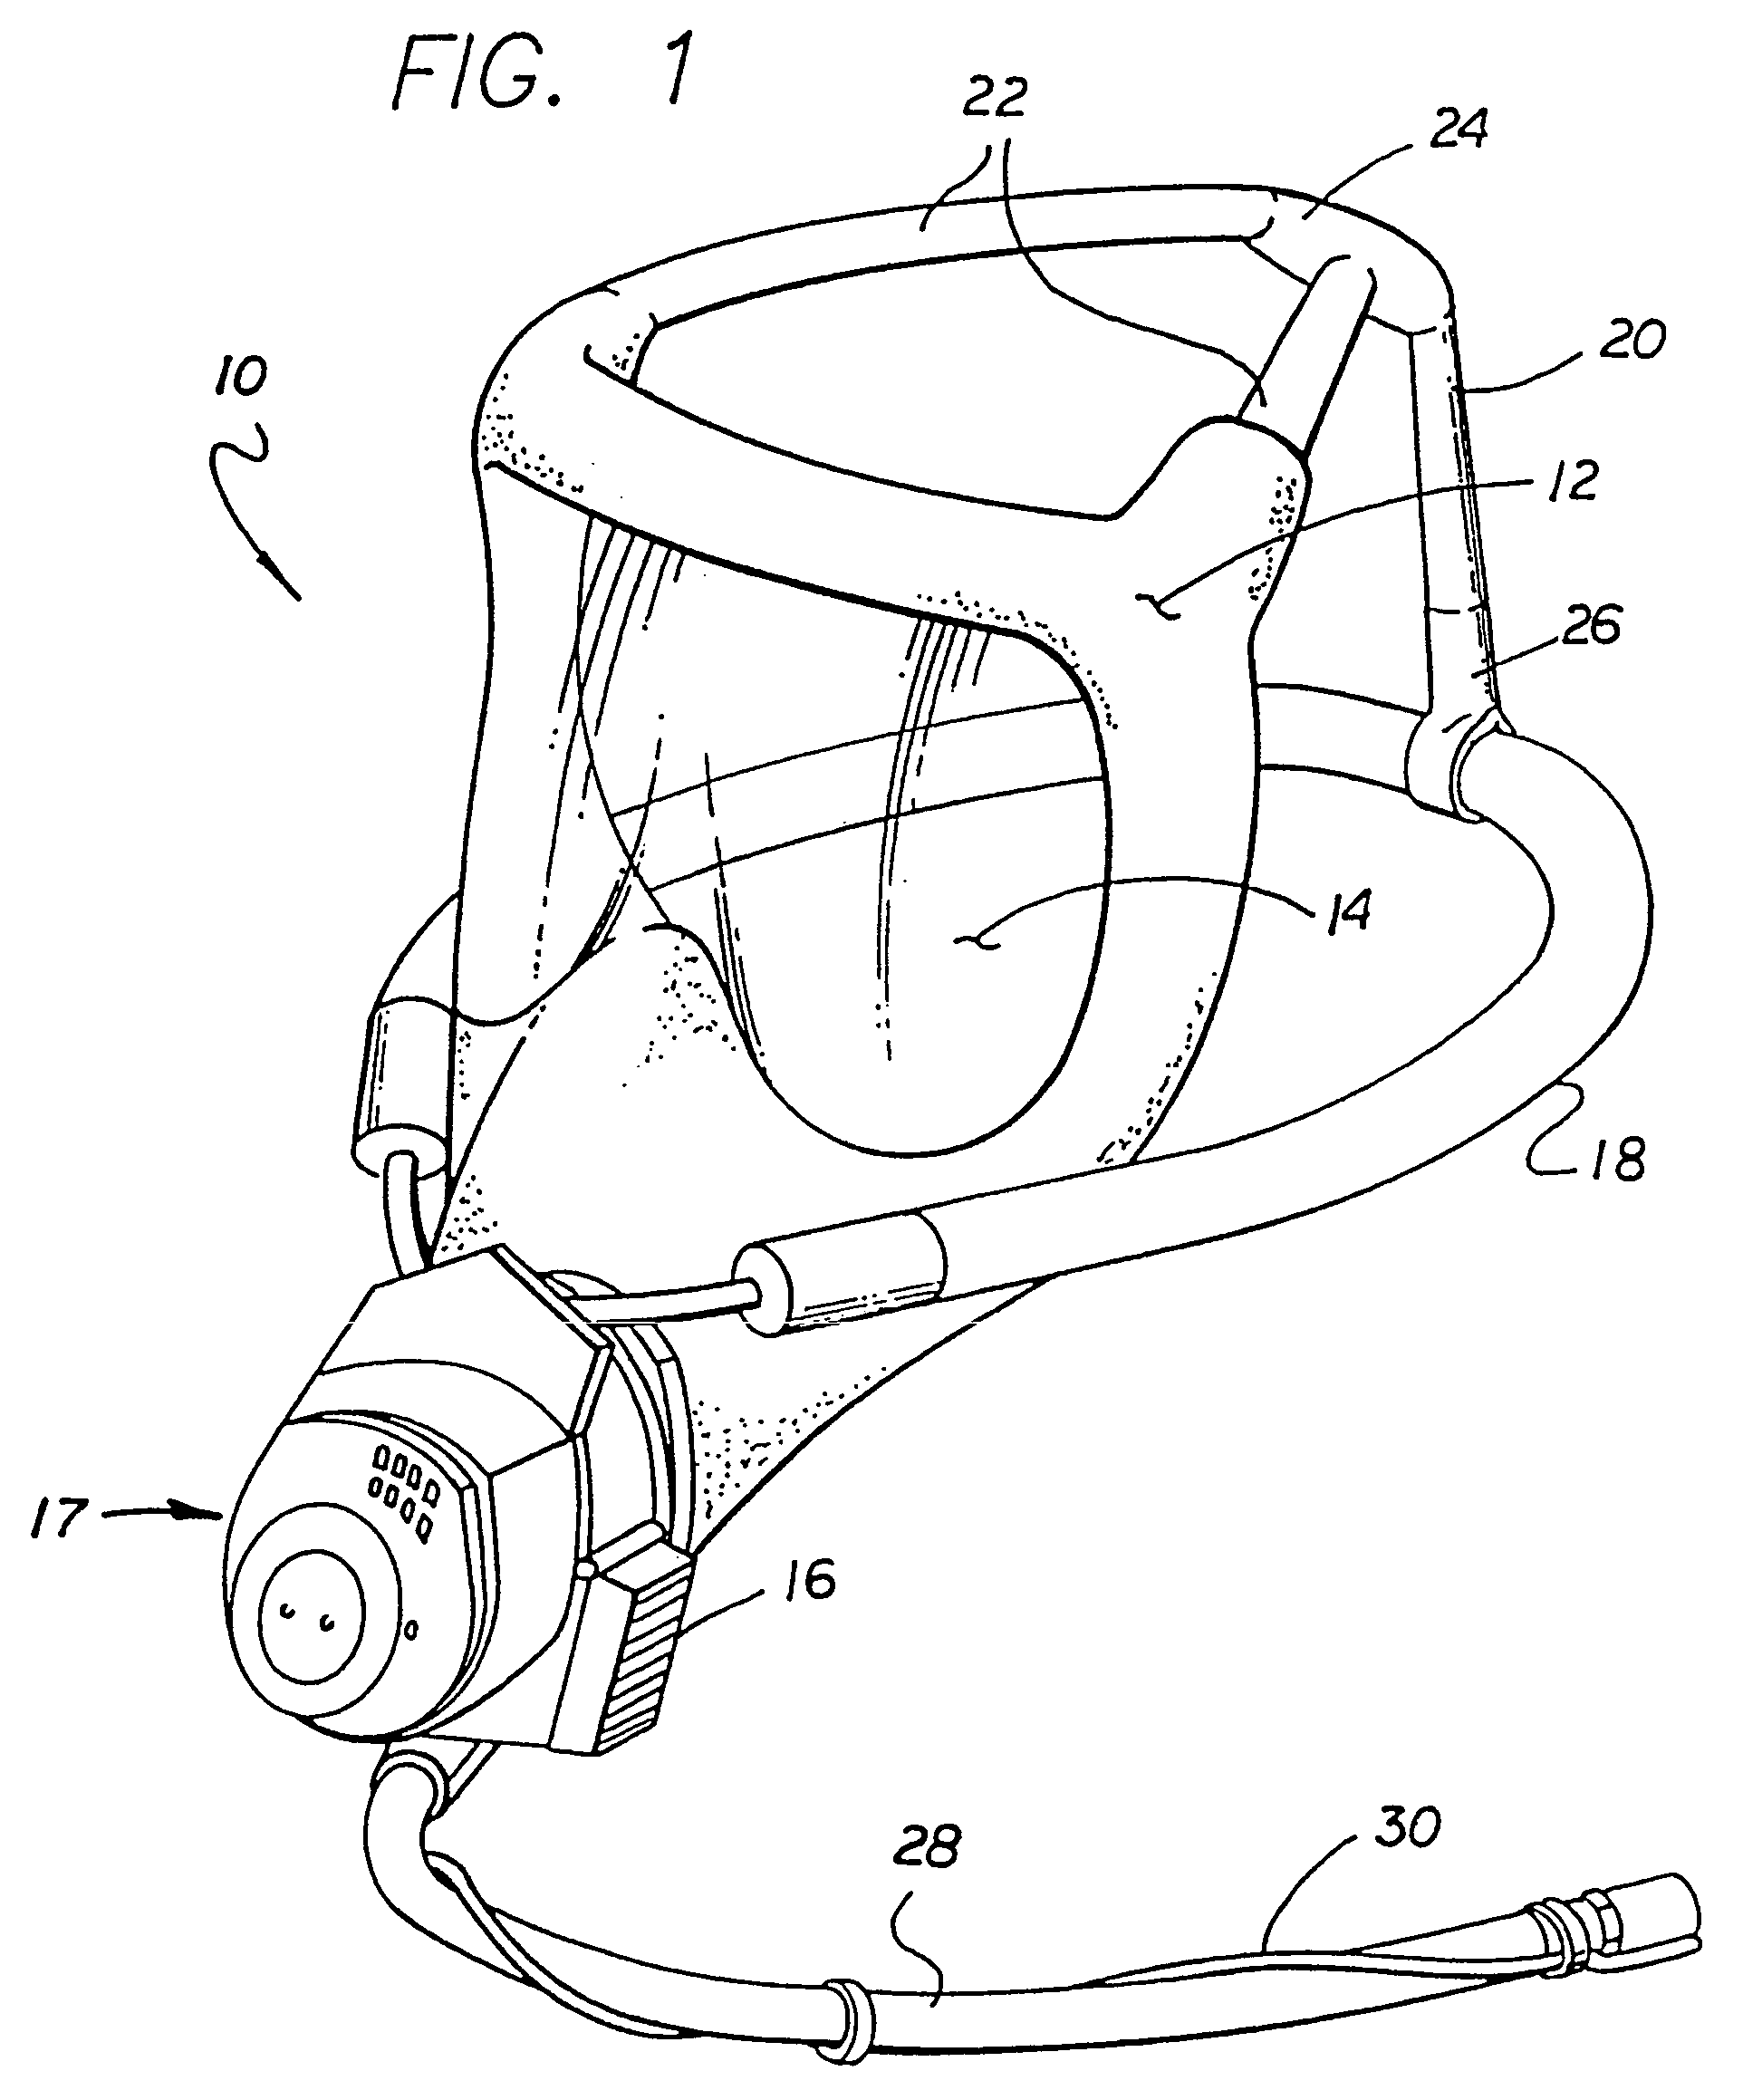 Quick-donning full face oxygen mask with inflatable harness and soft foldable lens